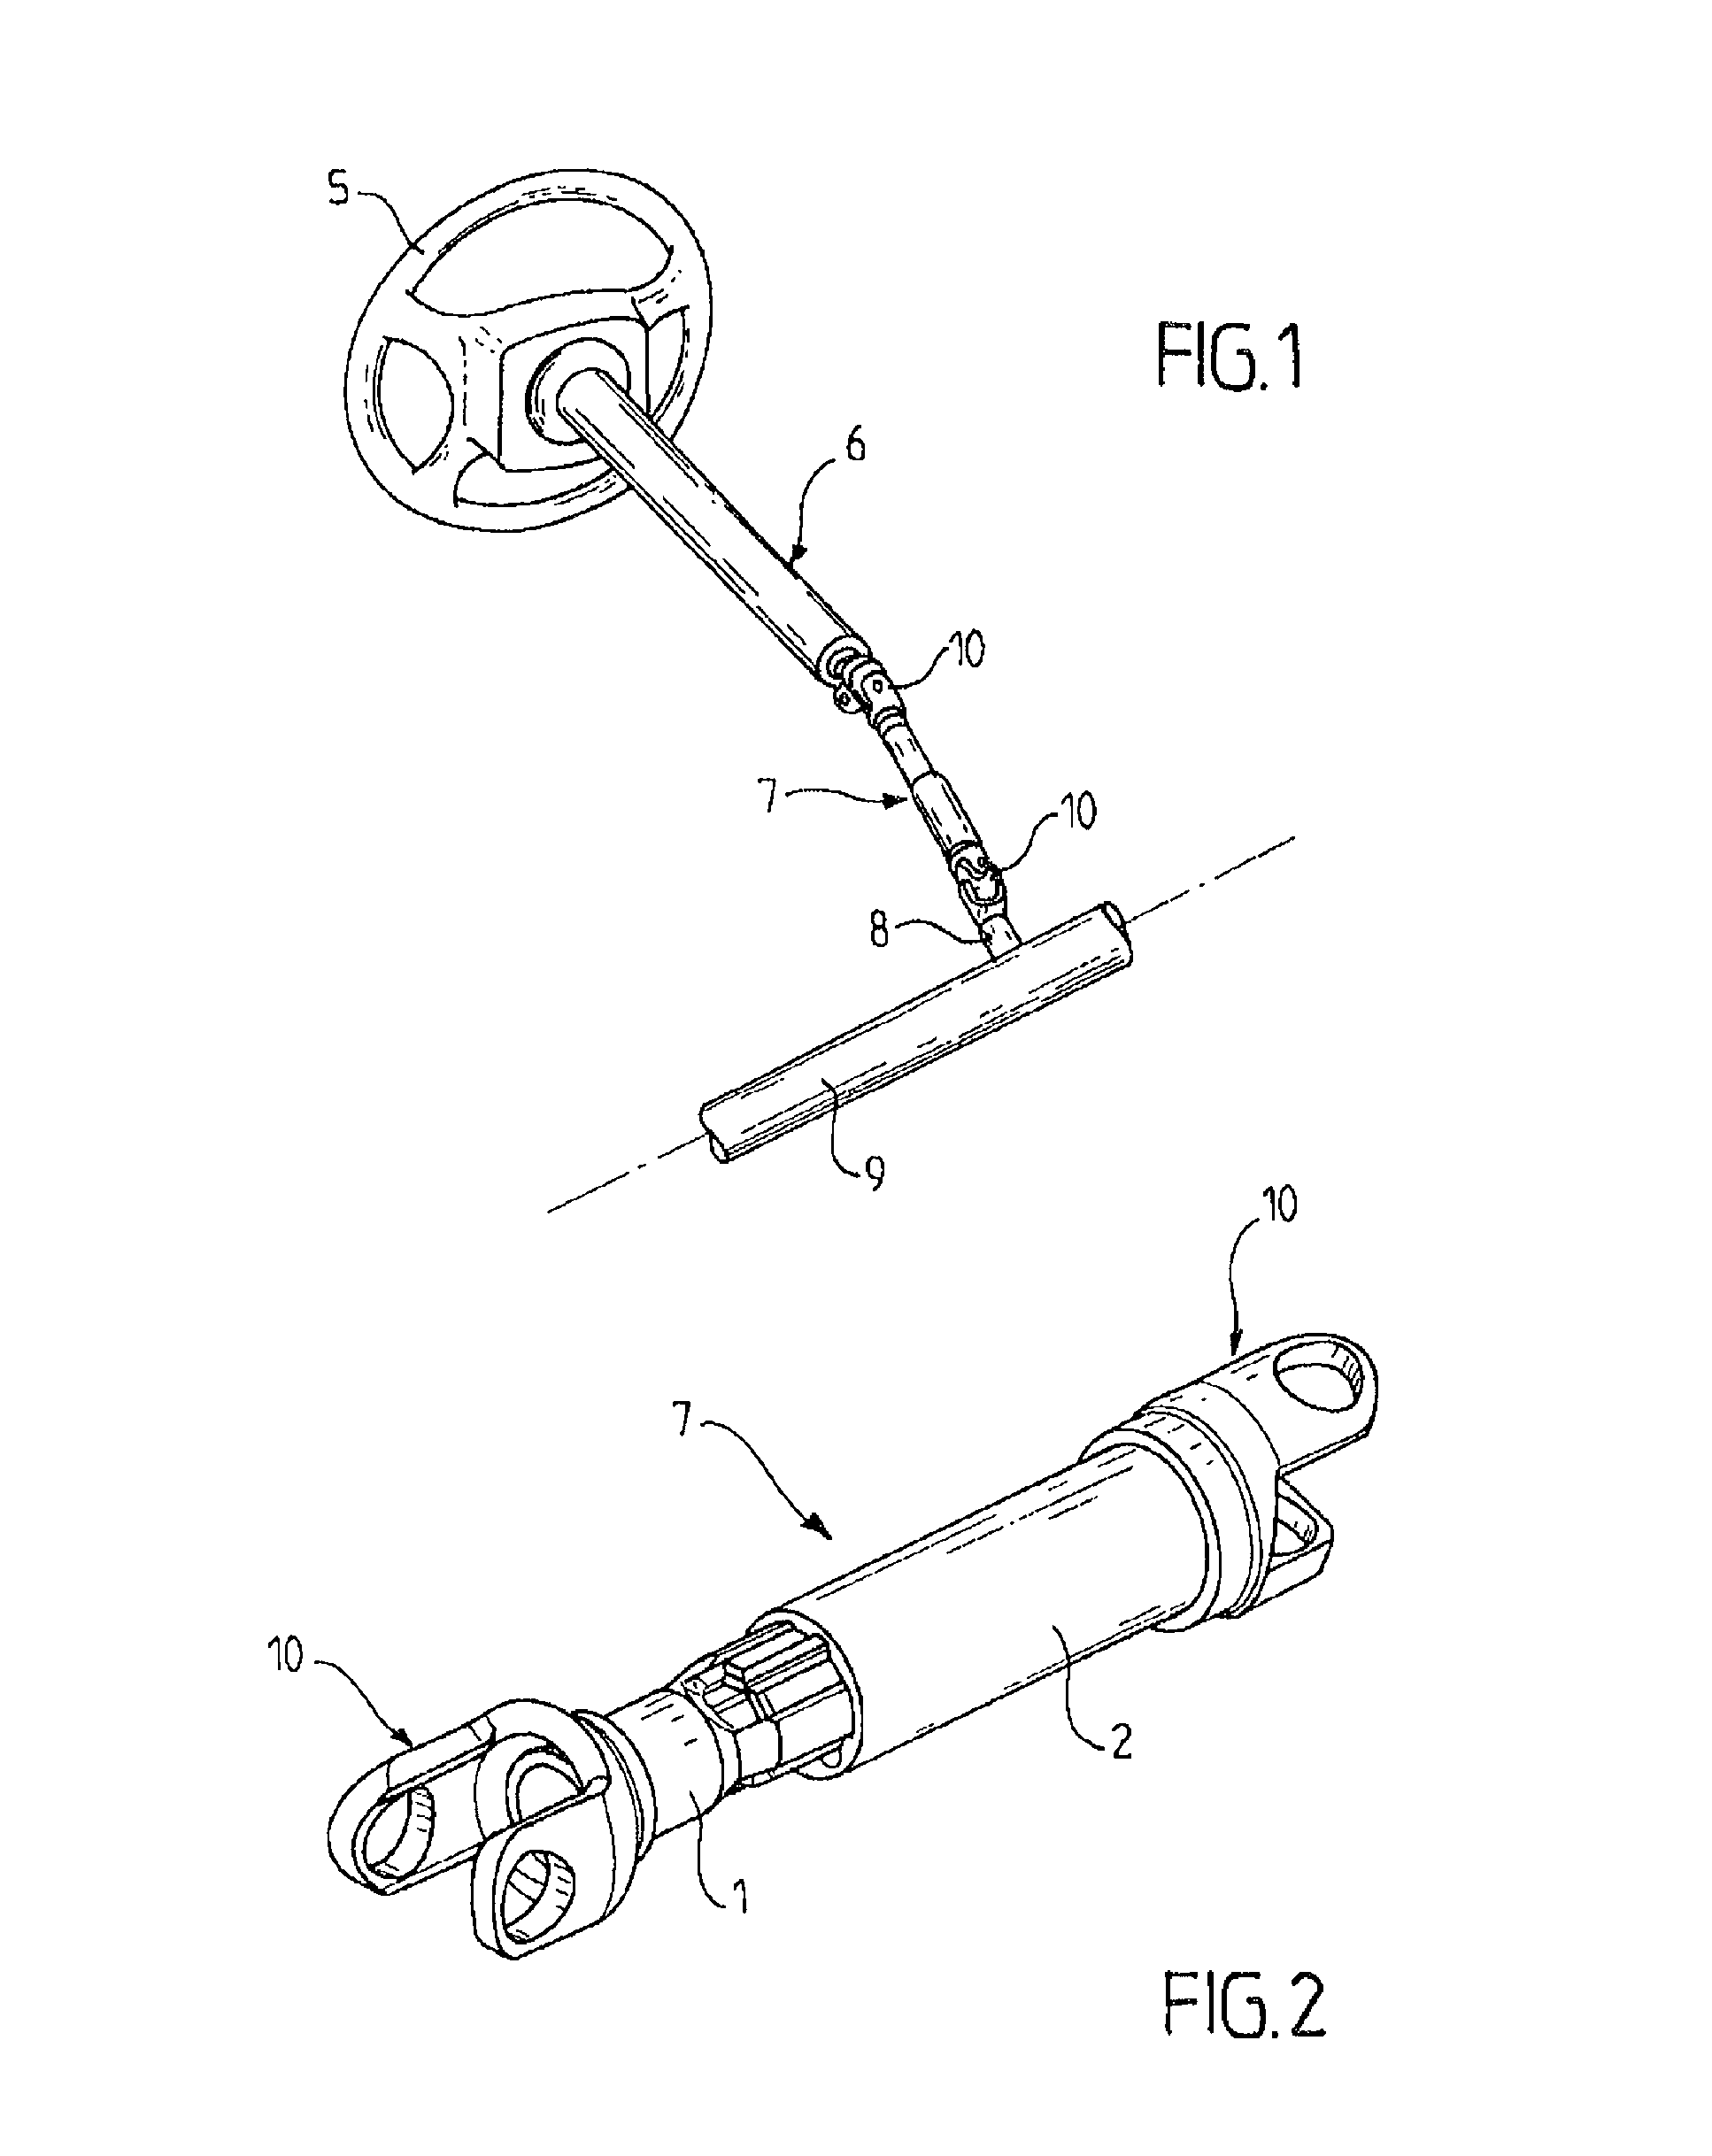 Ball-type coupling device for coupling two sliding shafts with pivoting support